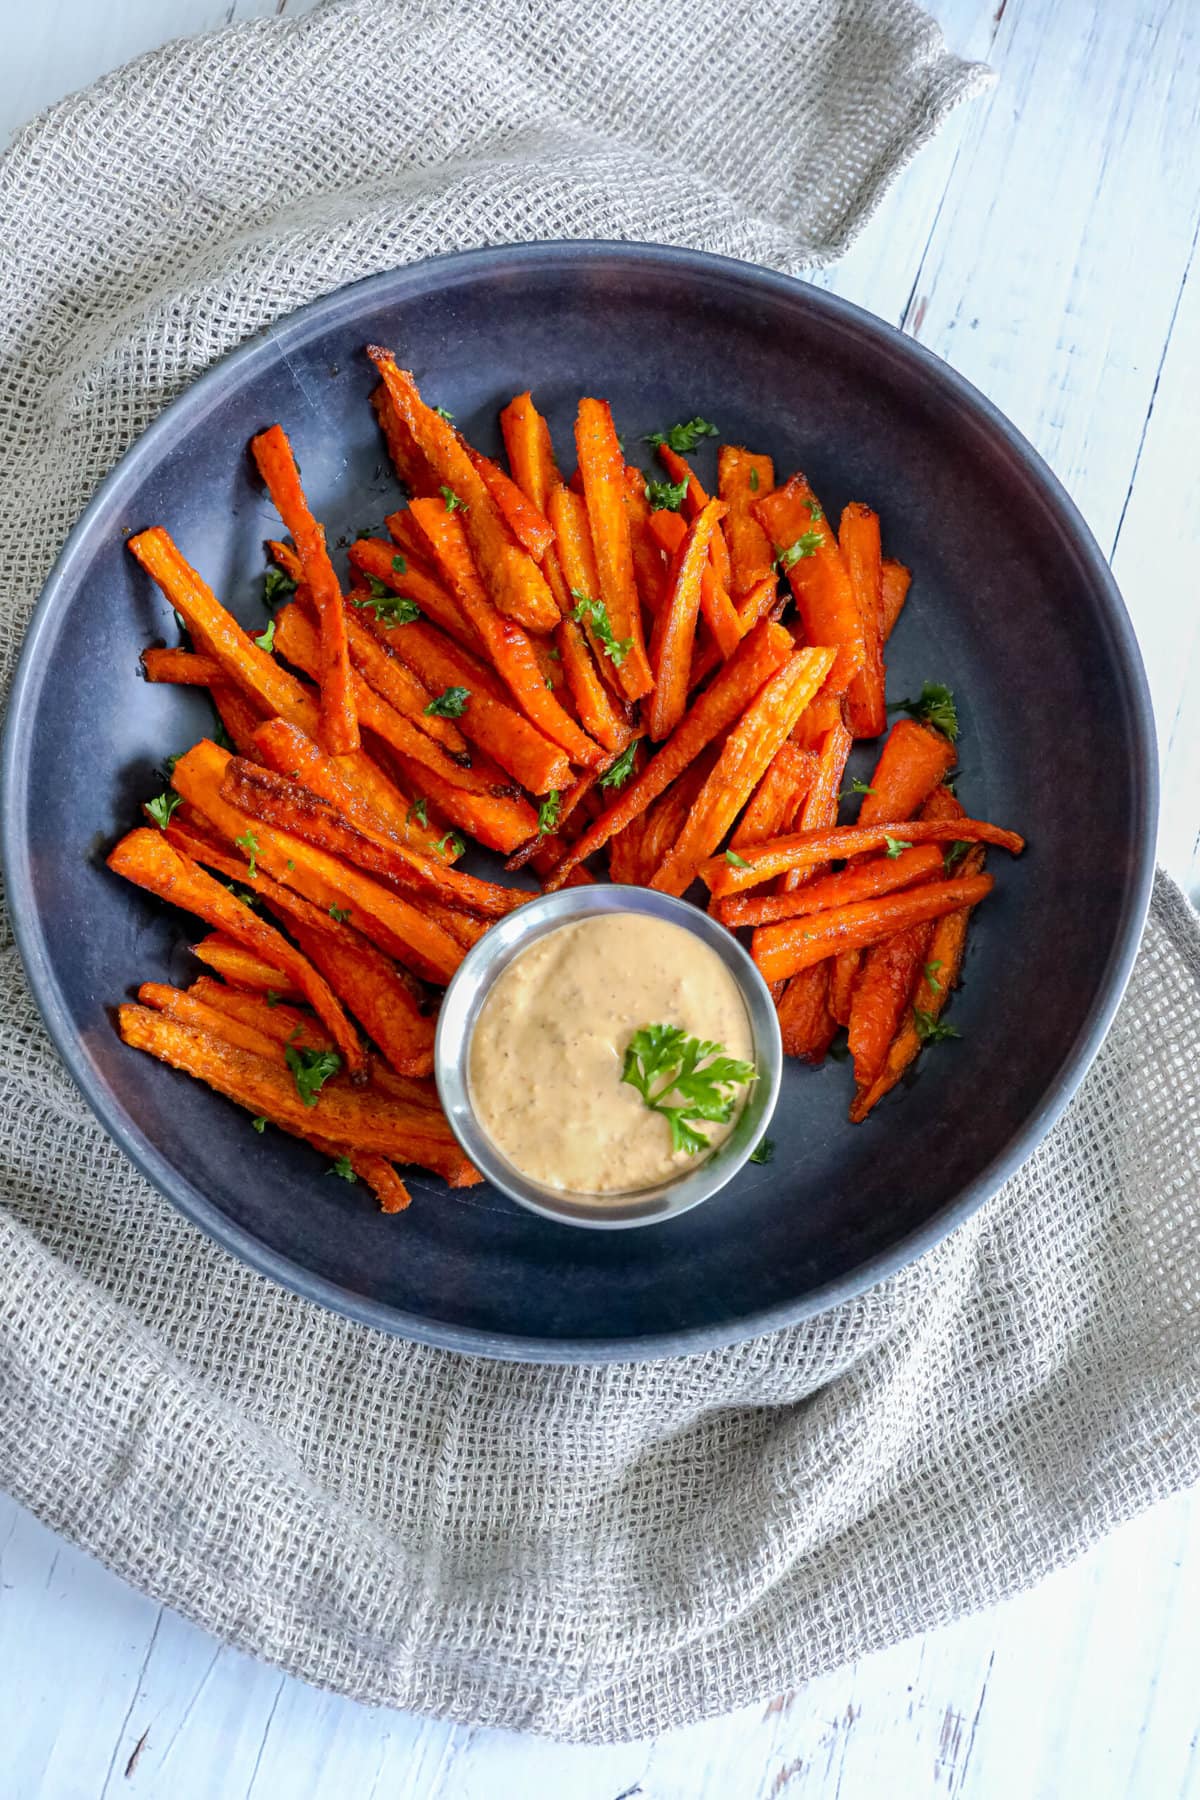 picture of carrot fries with parsley chopped on top on a black plate with a cup of sauce on the side